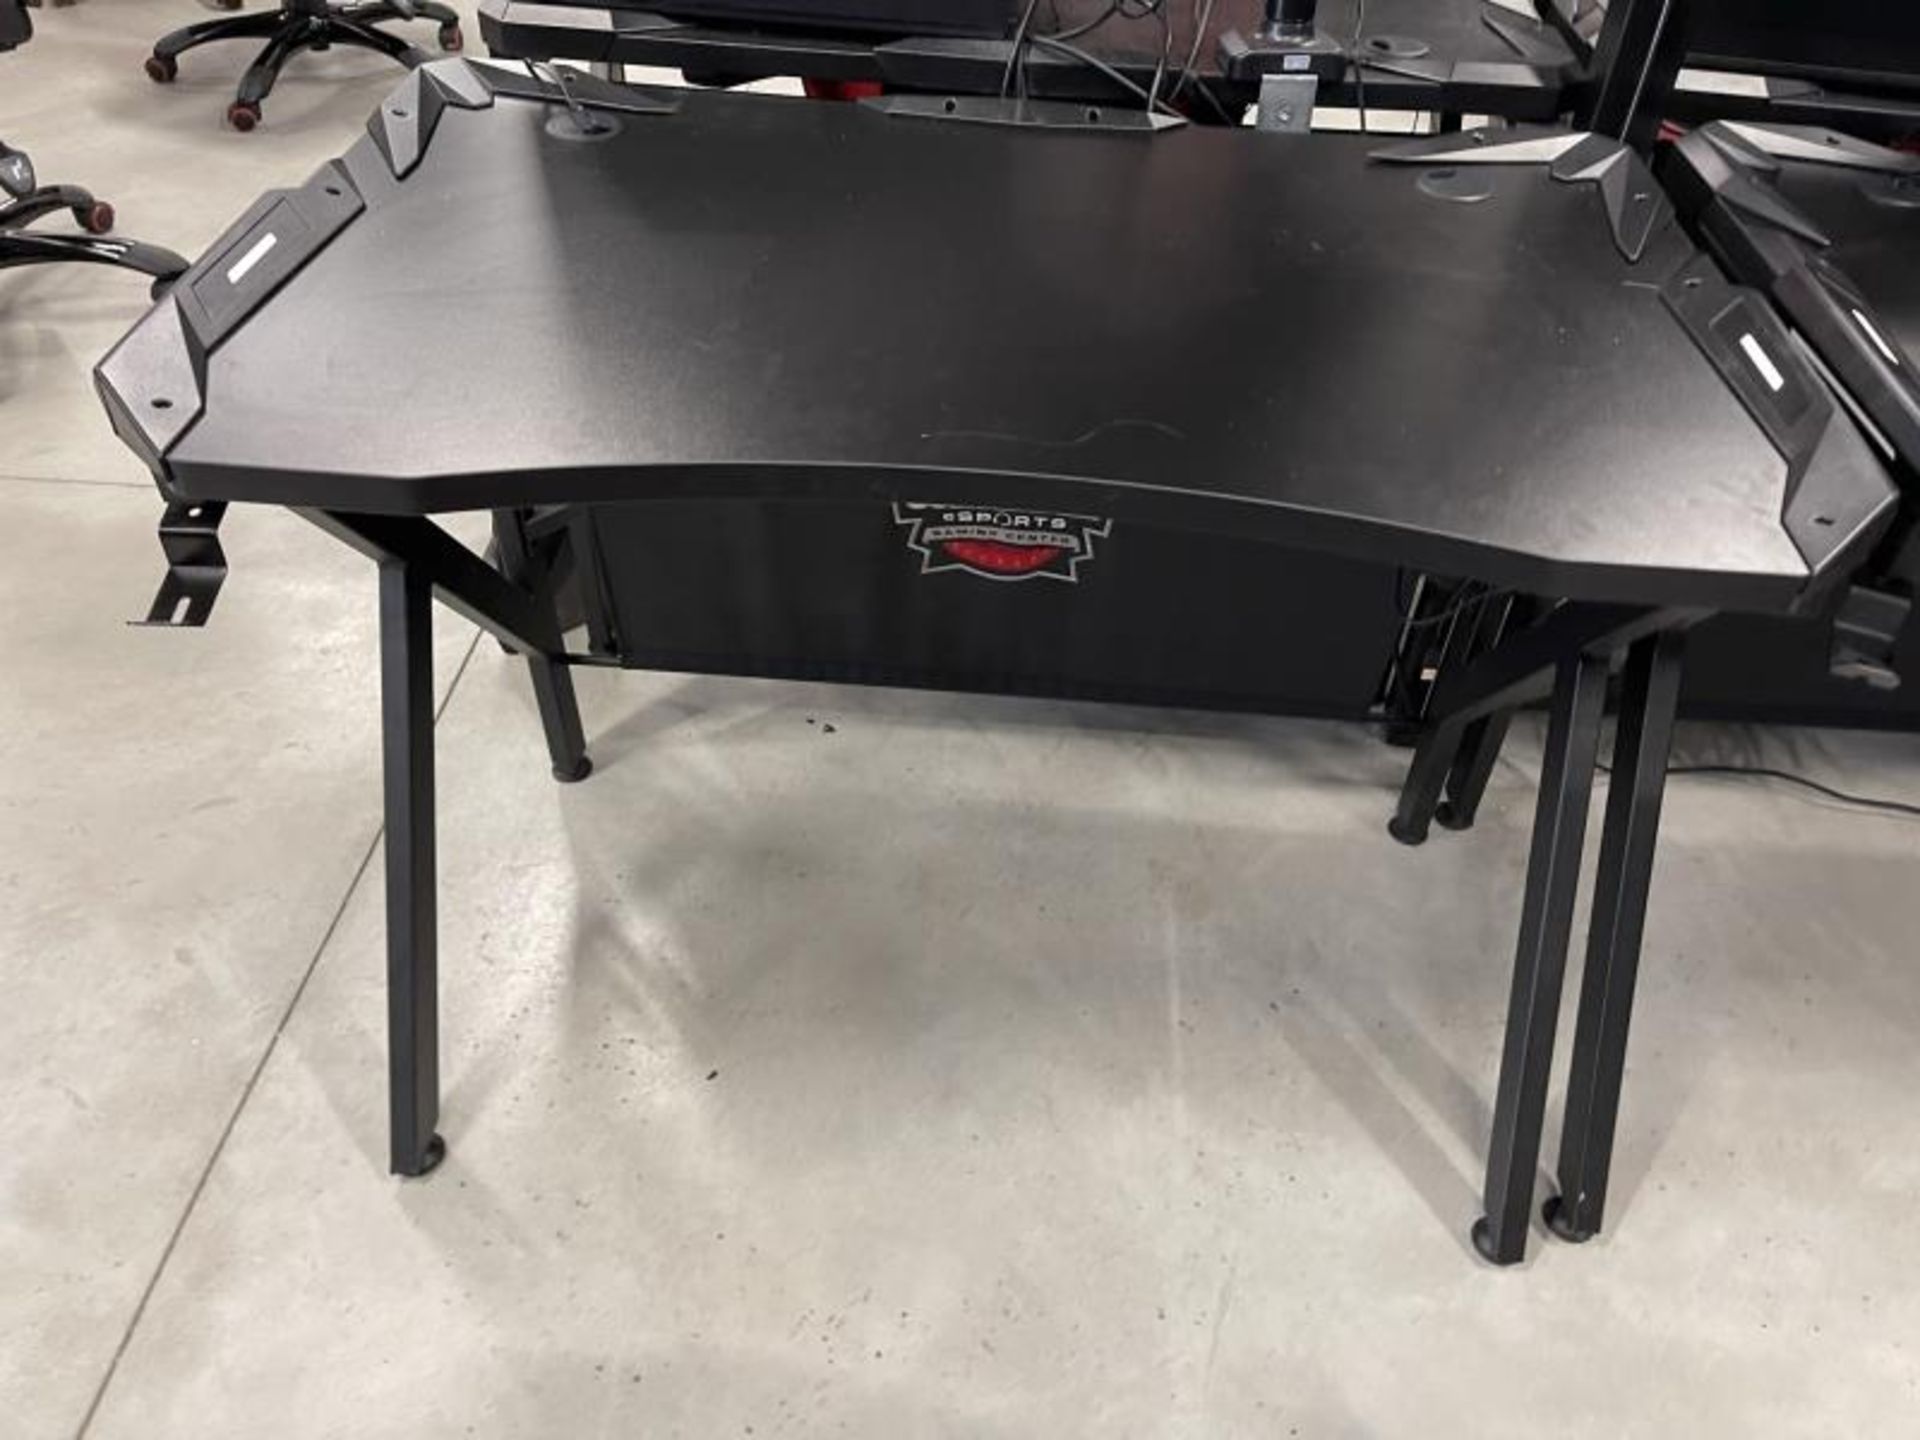 Gaming Desk 40" x 24" w/ Contender Red & Black Gaming Chair - Image 2 of 4